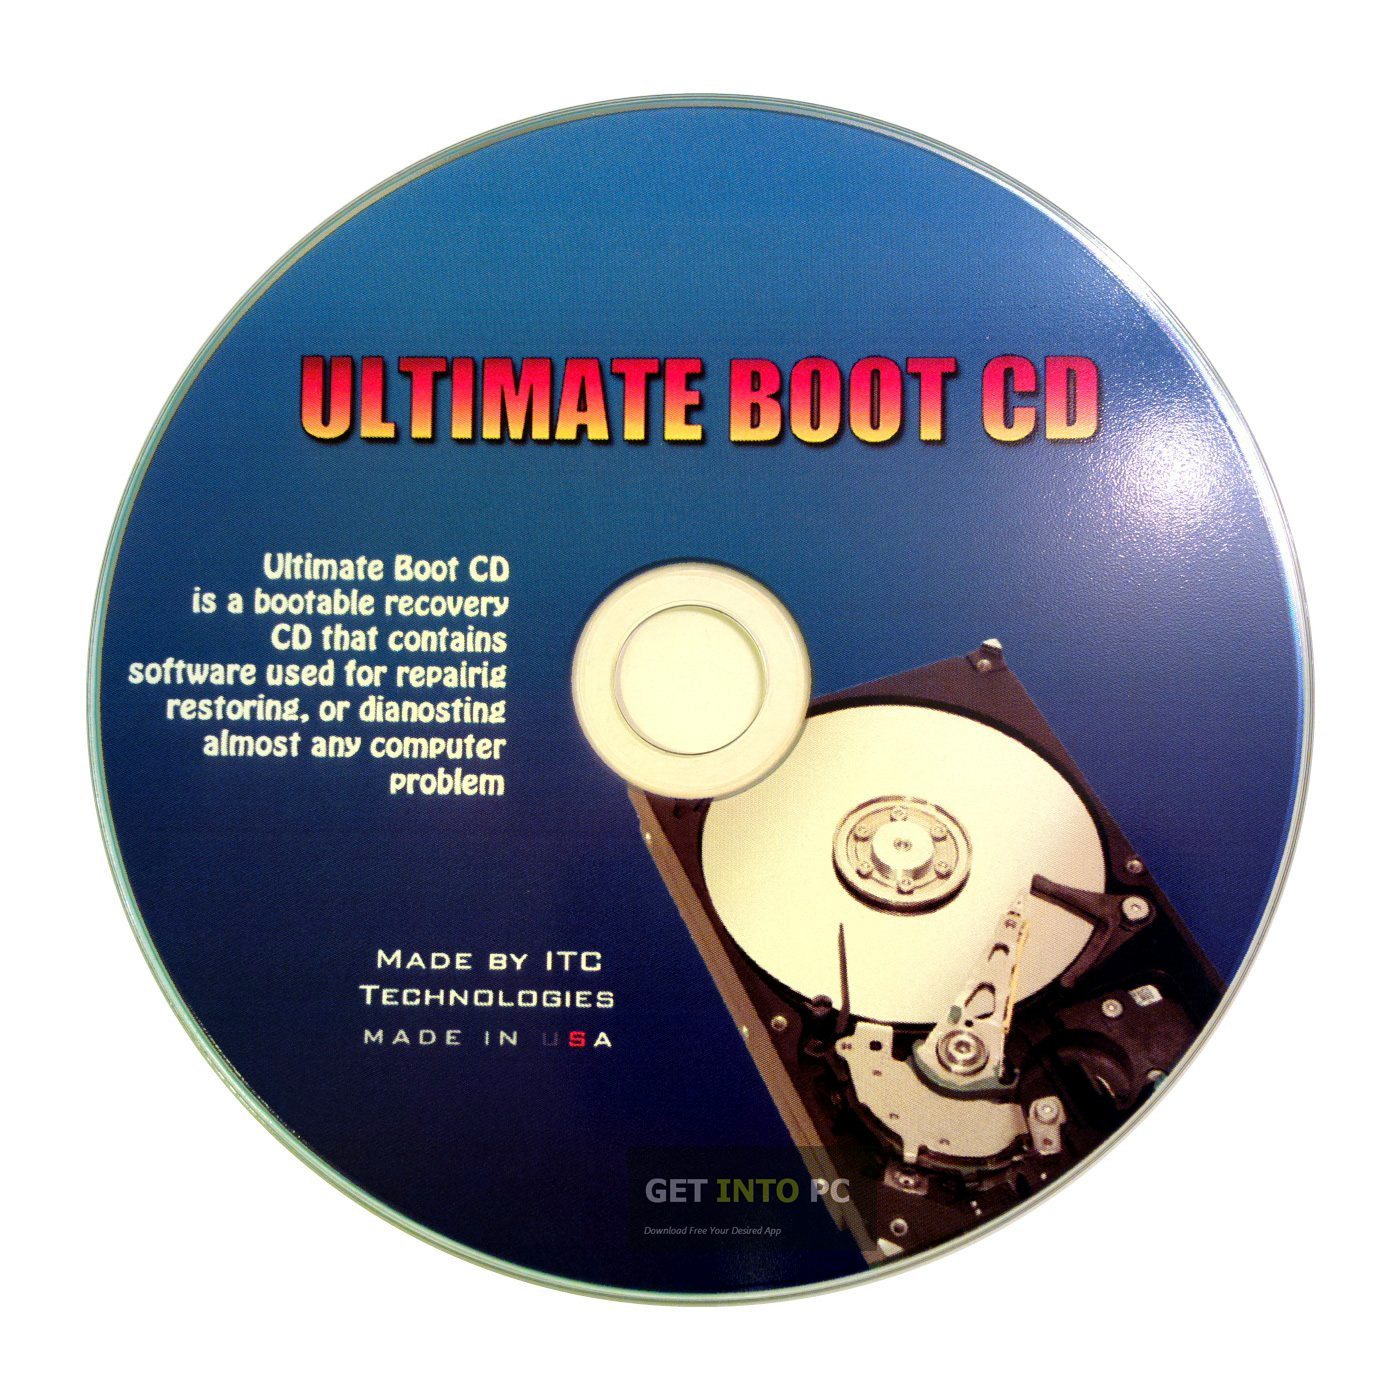 Ultimate Boot CD Download ISO Image